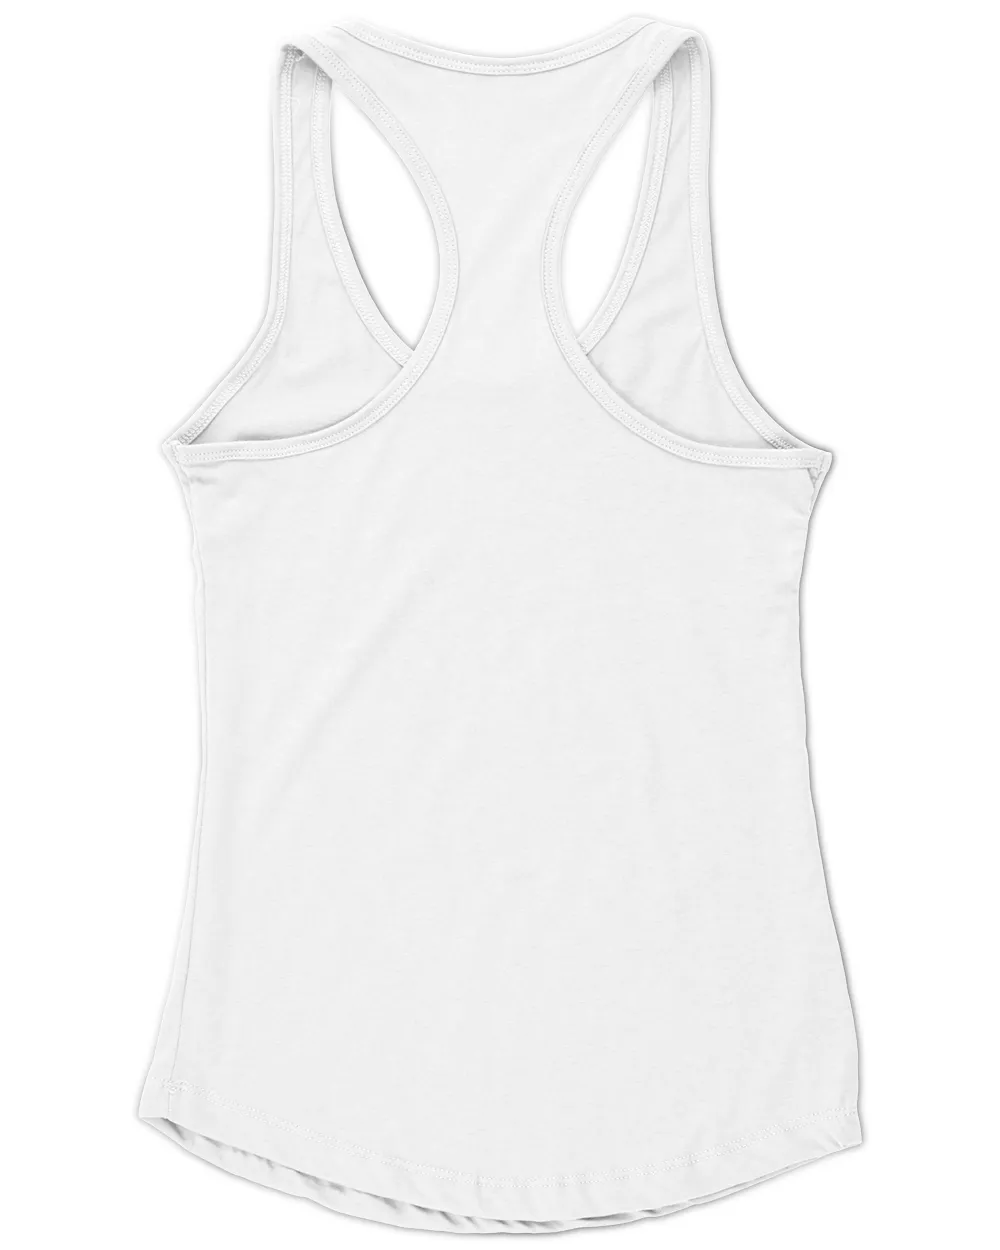 Spooky Ghost Boo Bees Tank Top